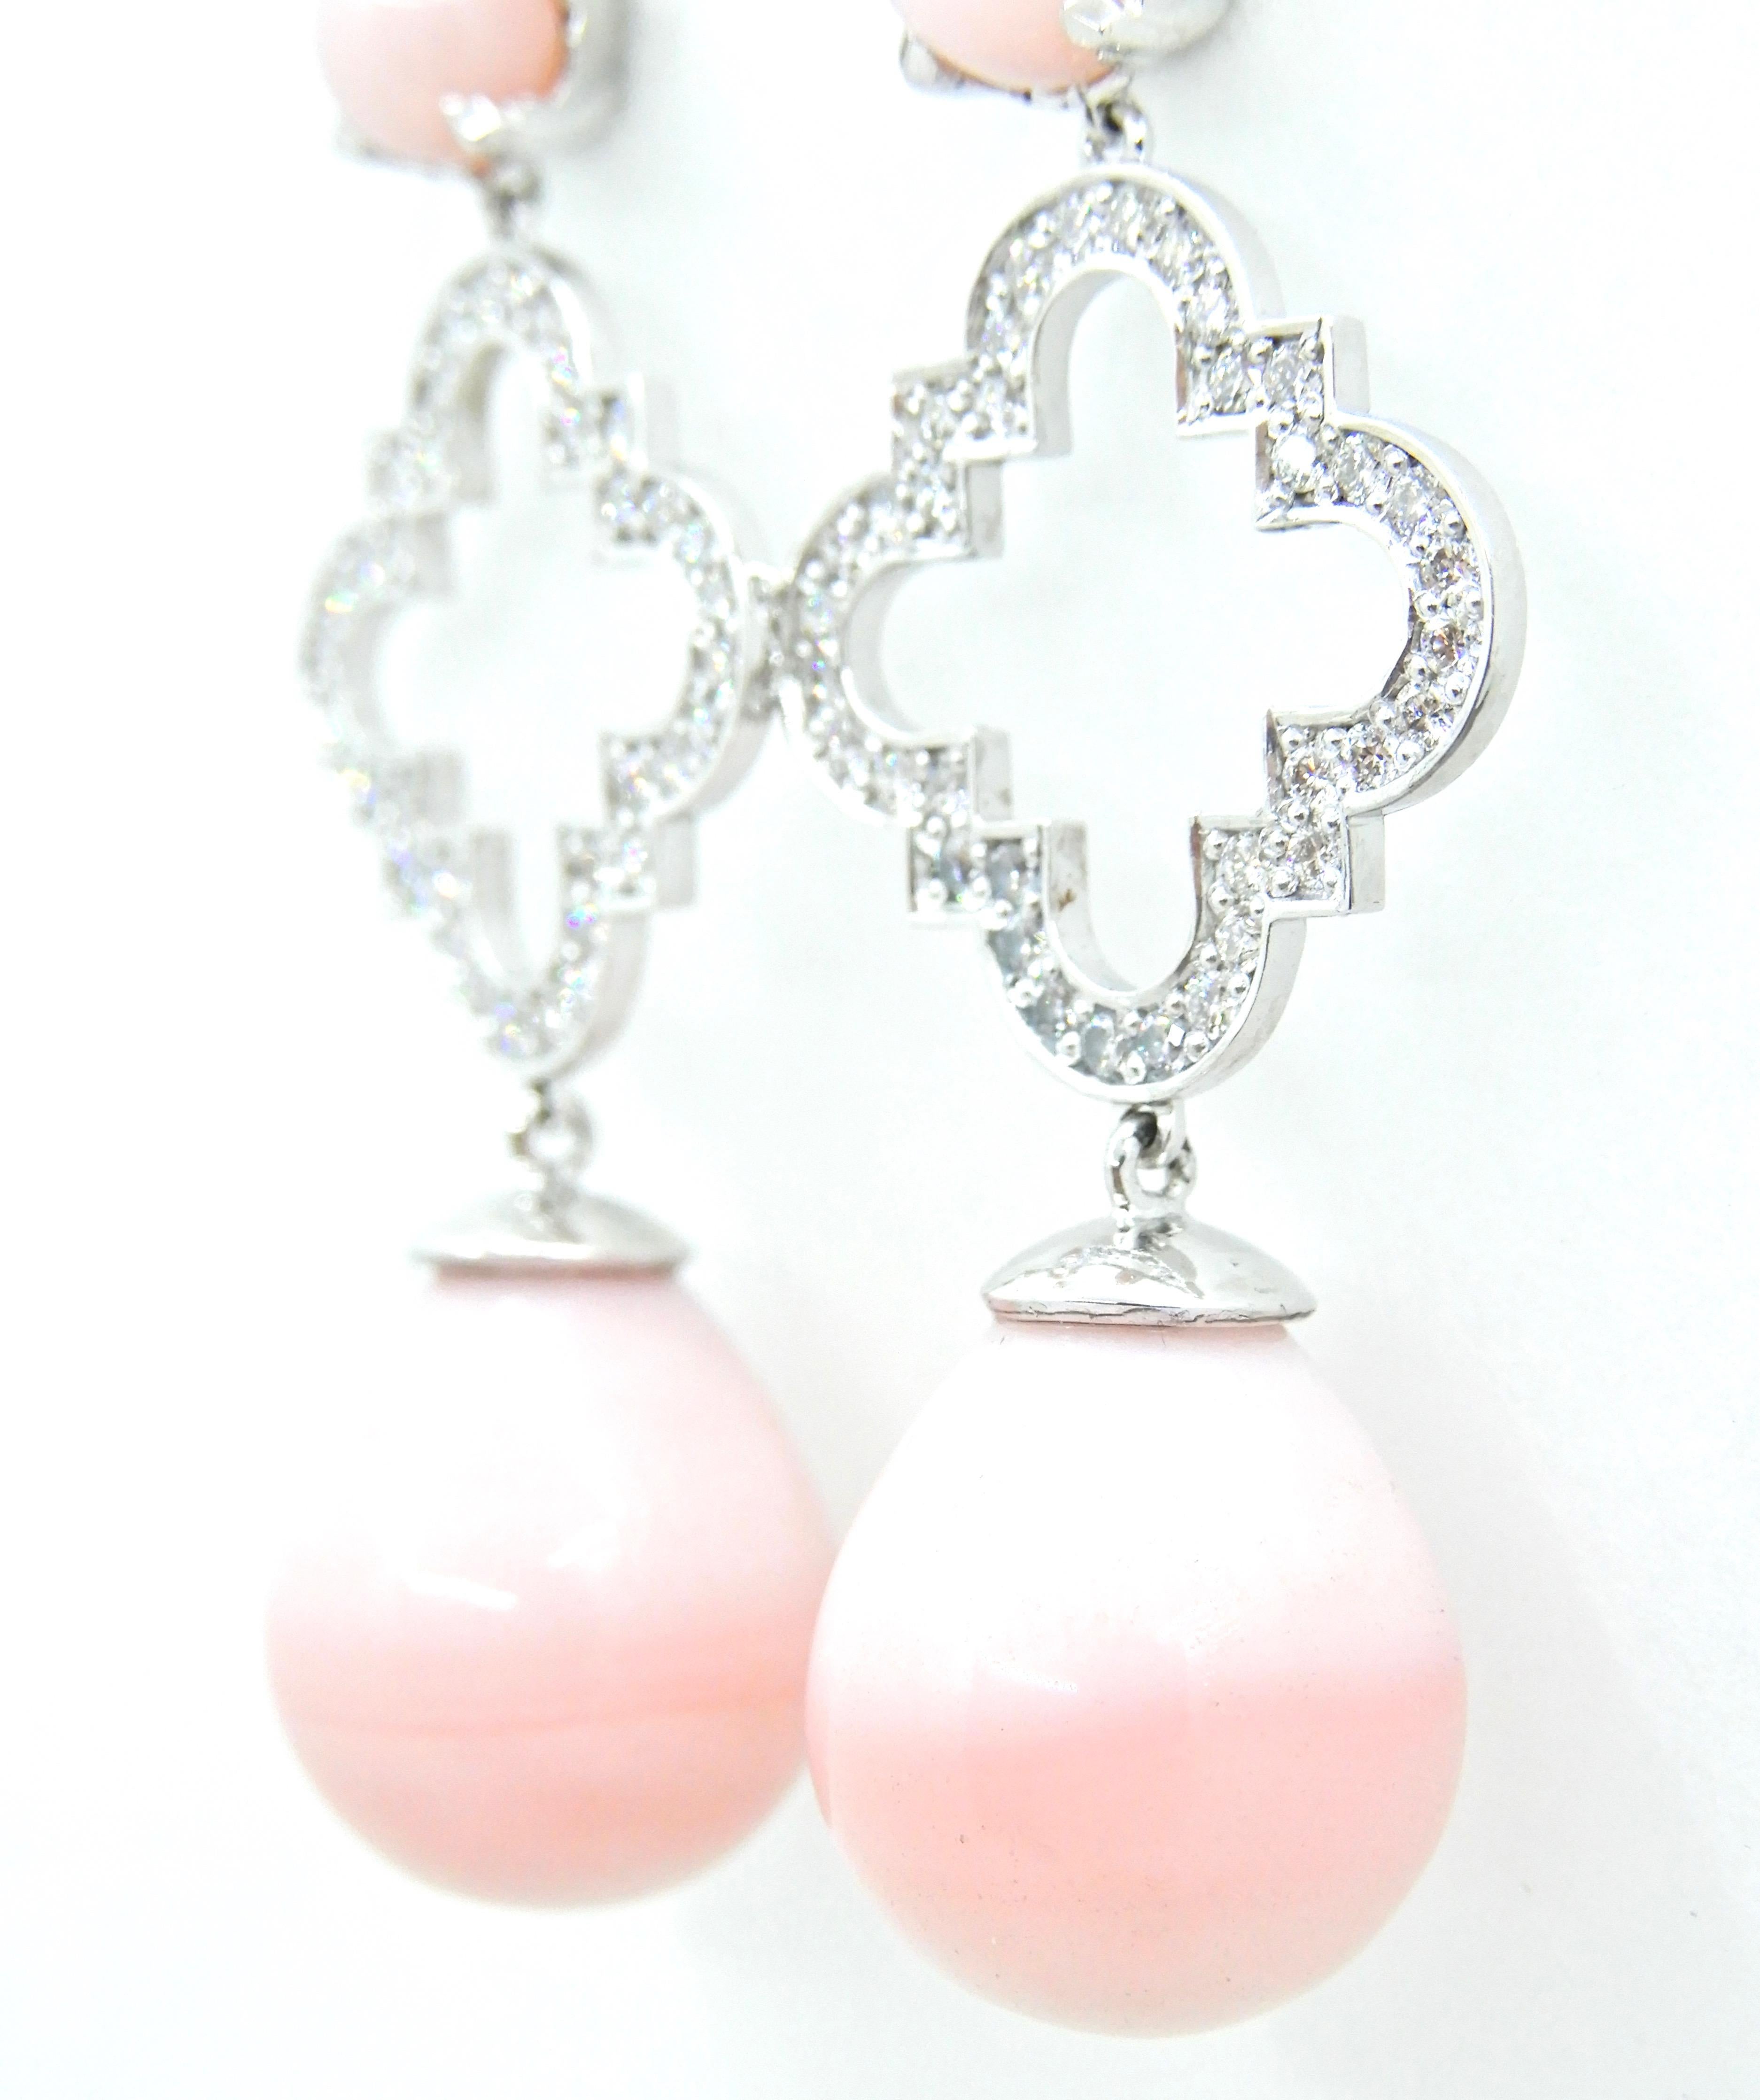 Peruvian Pink Opal Diamond and 18 Carat White Gold Earrings For Sale 1